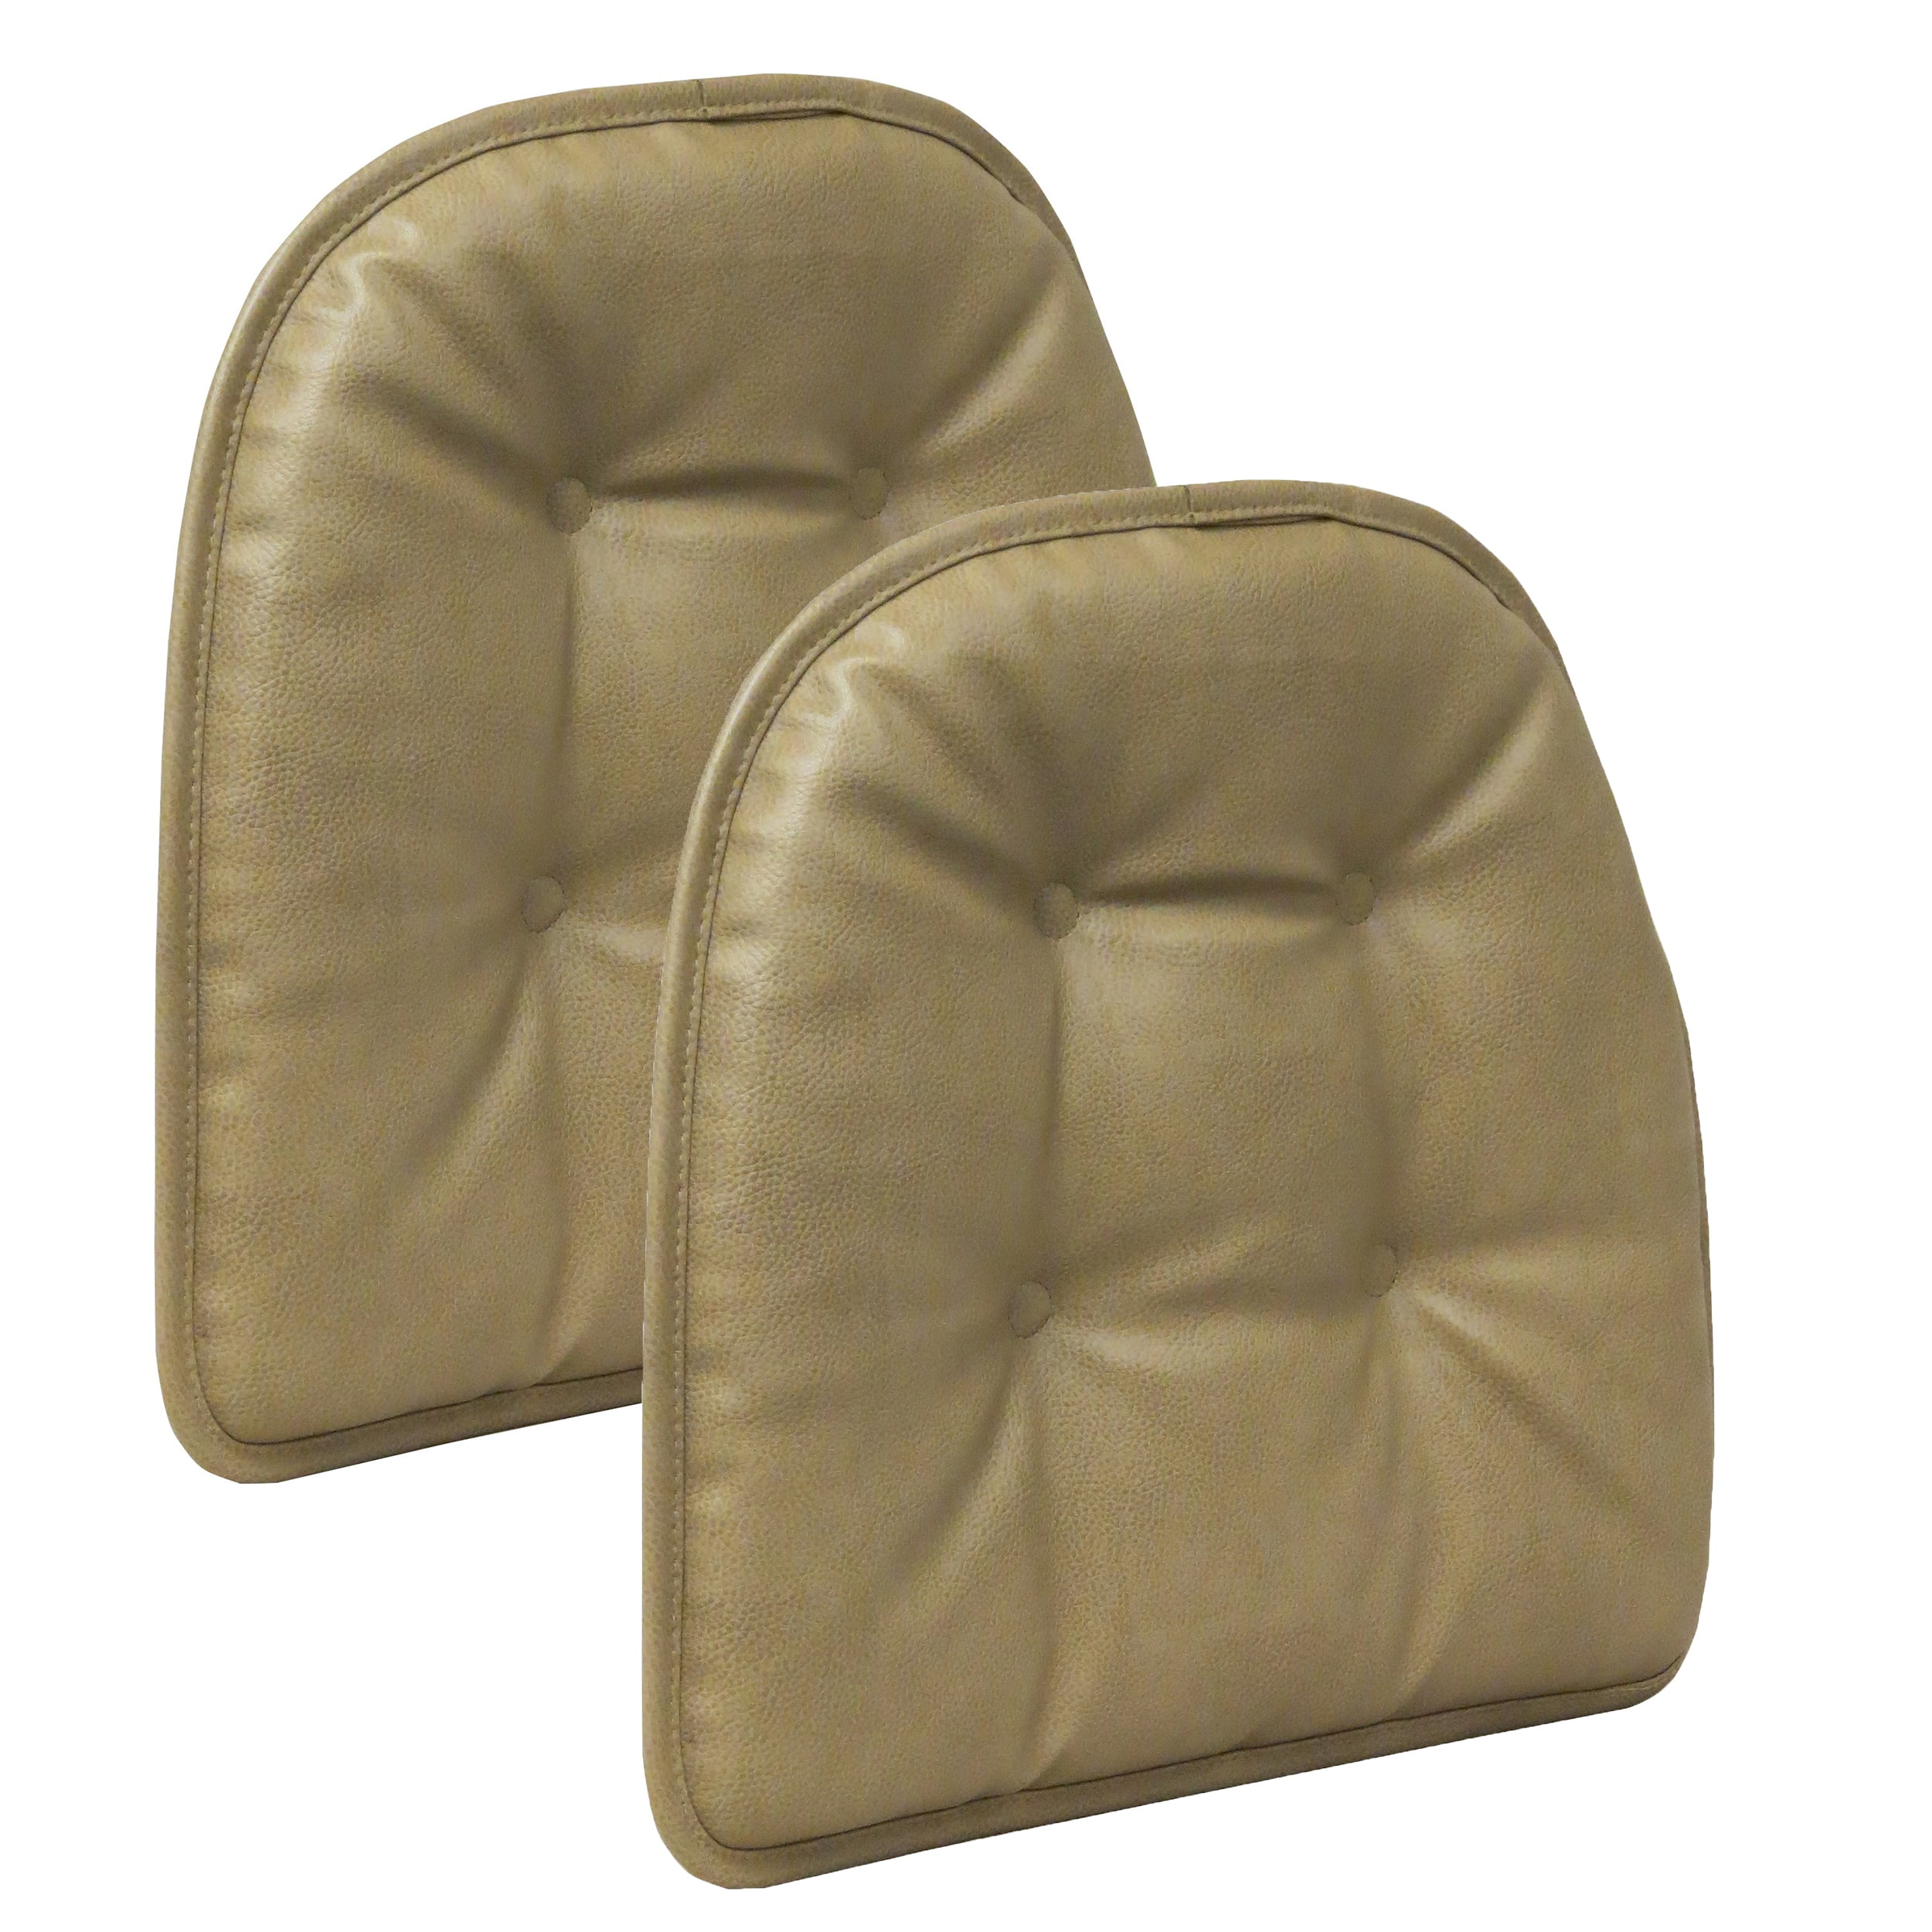 Faux Leather Tufted Chair Cushions Set, Leather Seat Pads